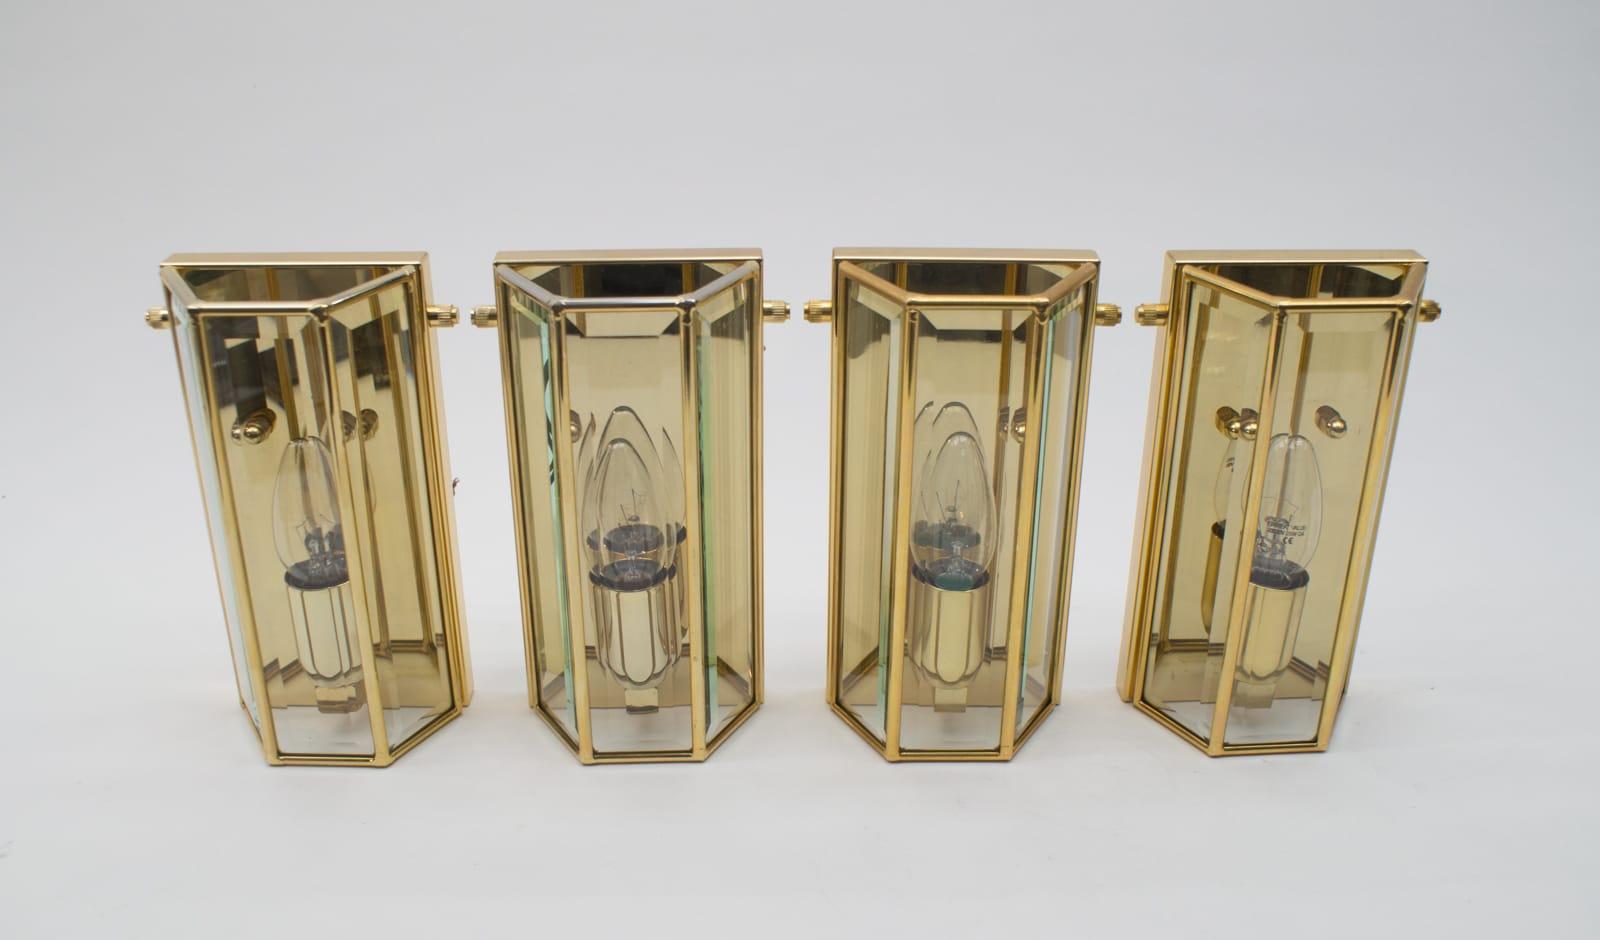 Set of 4 Elegant Midcentury Brass and Cut Glass Wall Lamps by W. Müller Munich For Sale 2